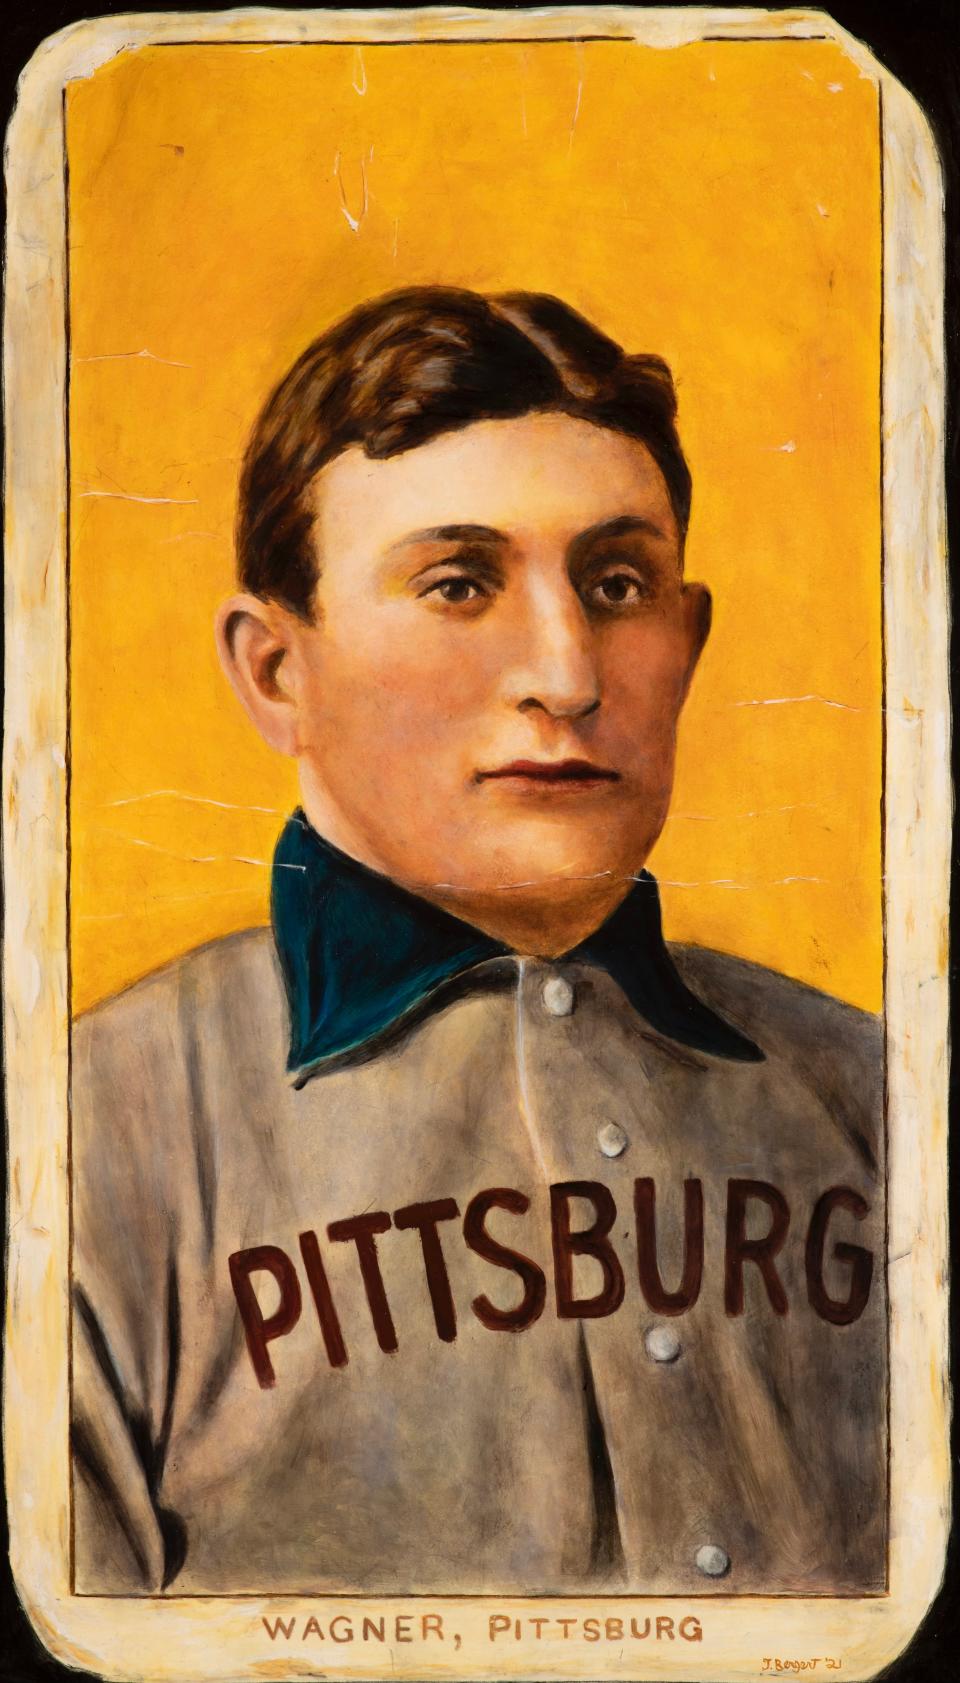 Stark County attorney Todd Bergert is among the artists whose work will be showcased in the Stark County Artists Exhibition at Massillon Museum. Other examples of his work include this oil painting depicting the famous 1910 Honus Wagner tobacco baseball card.